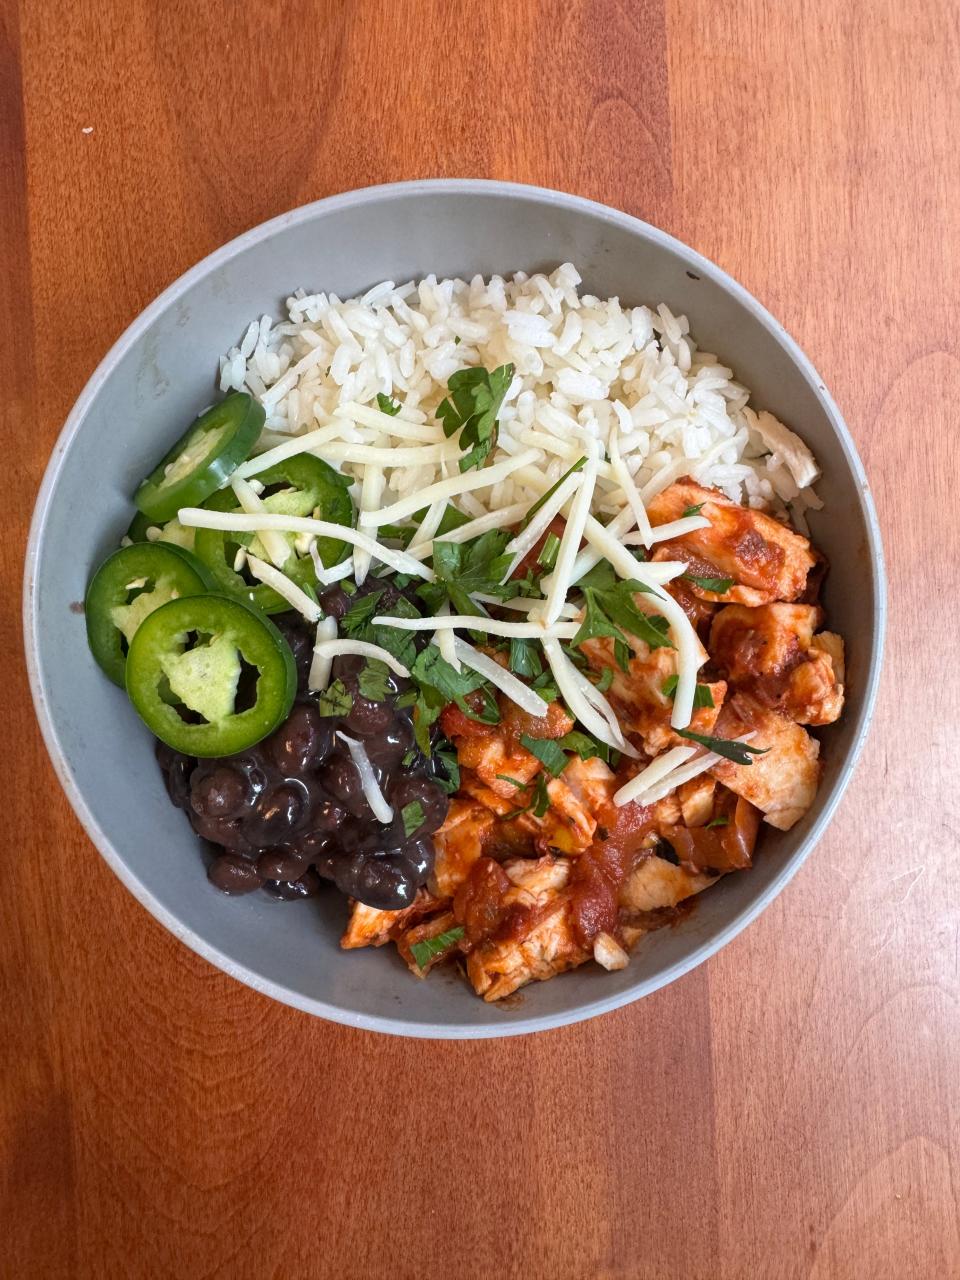 A bowl of rice, jalapenos, beans, chicken and cilantro